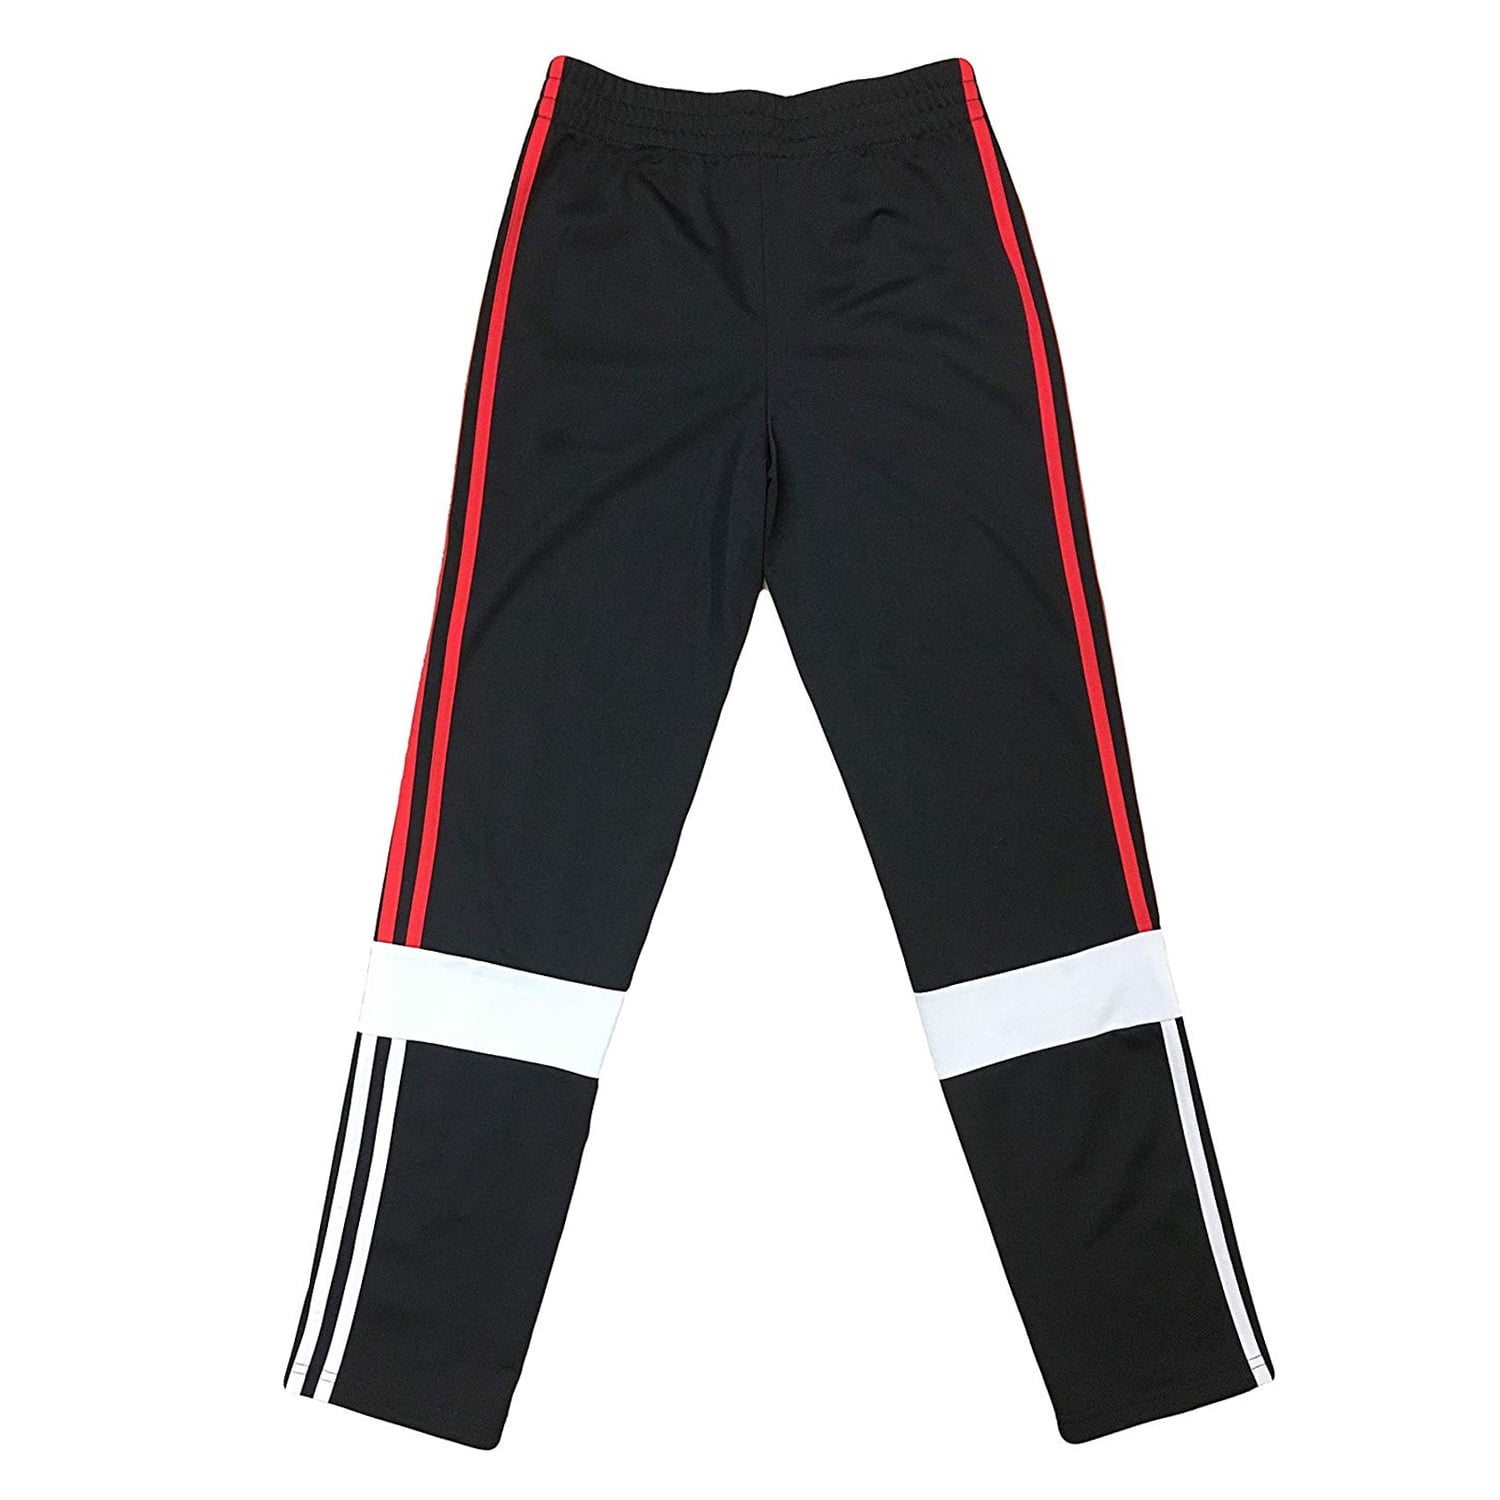 adidas red track pants with black stripes